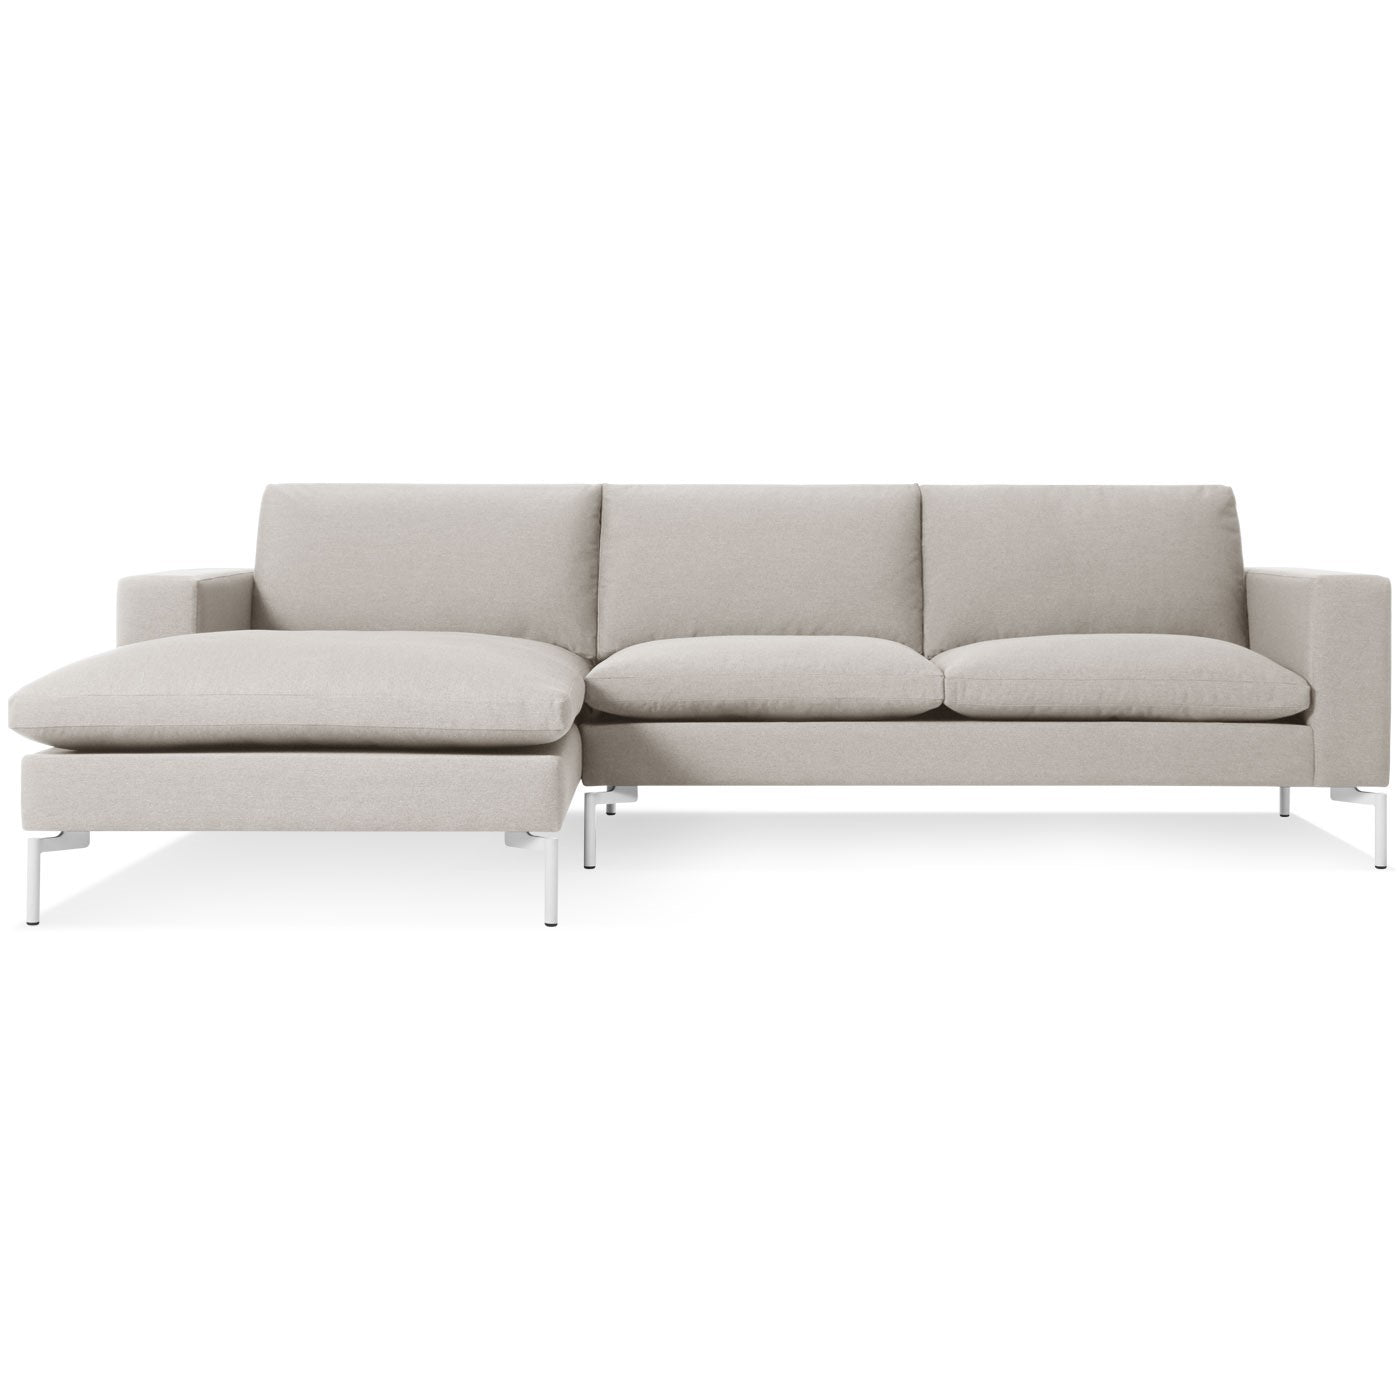 New Standard 105" Sofa Sectional